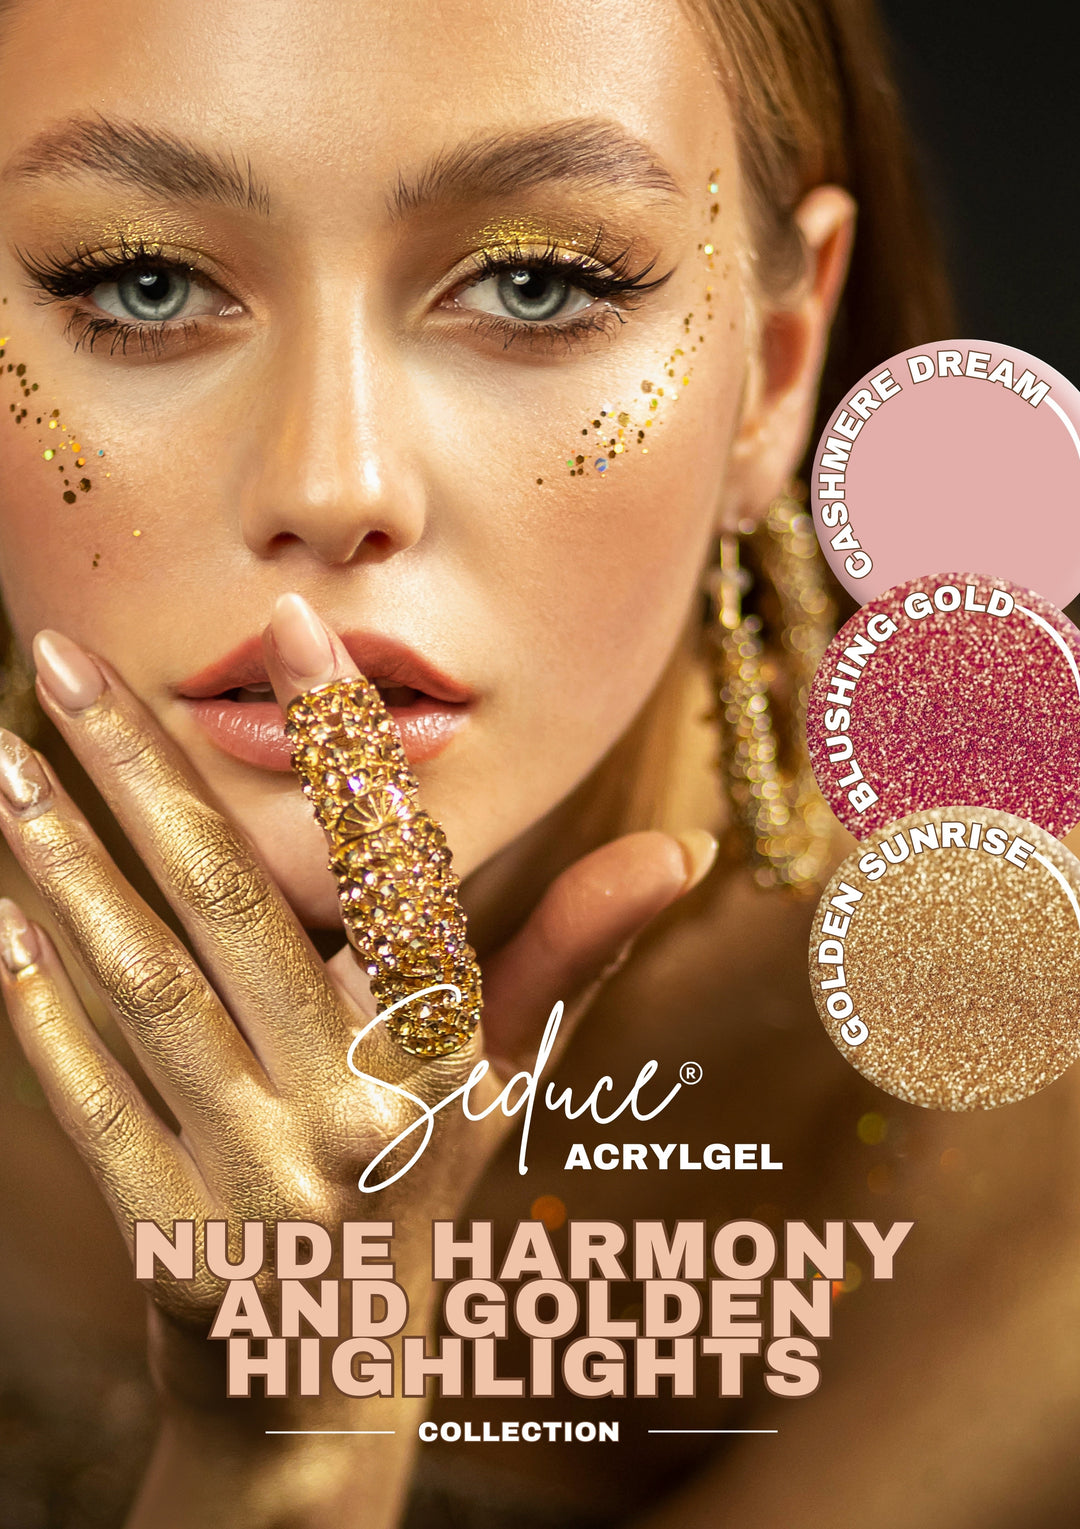 Nude harmony and golden highlights